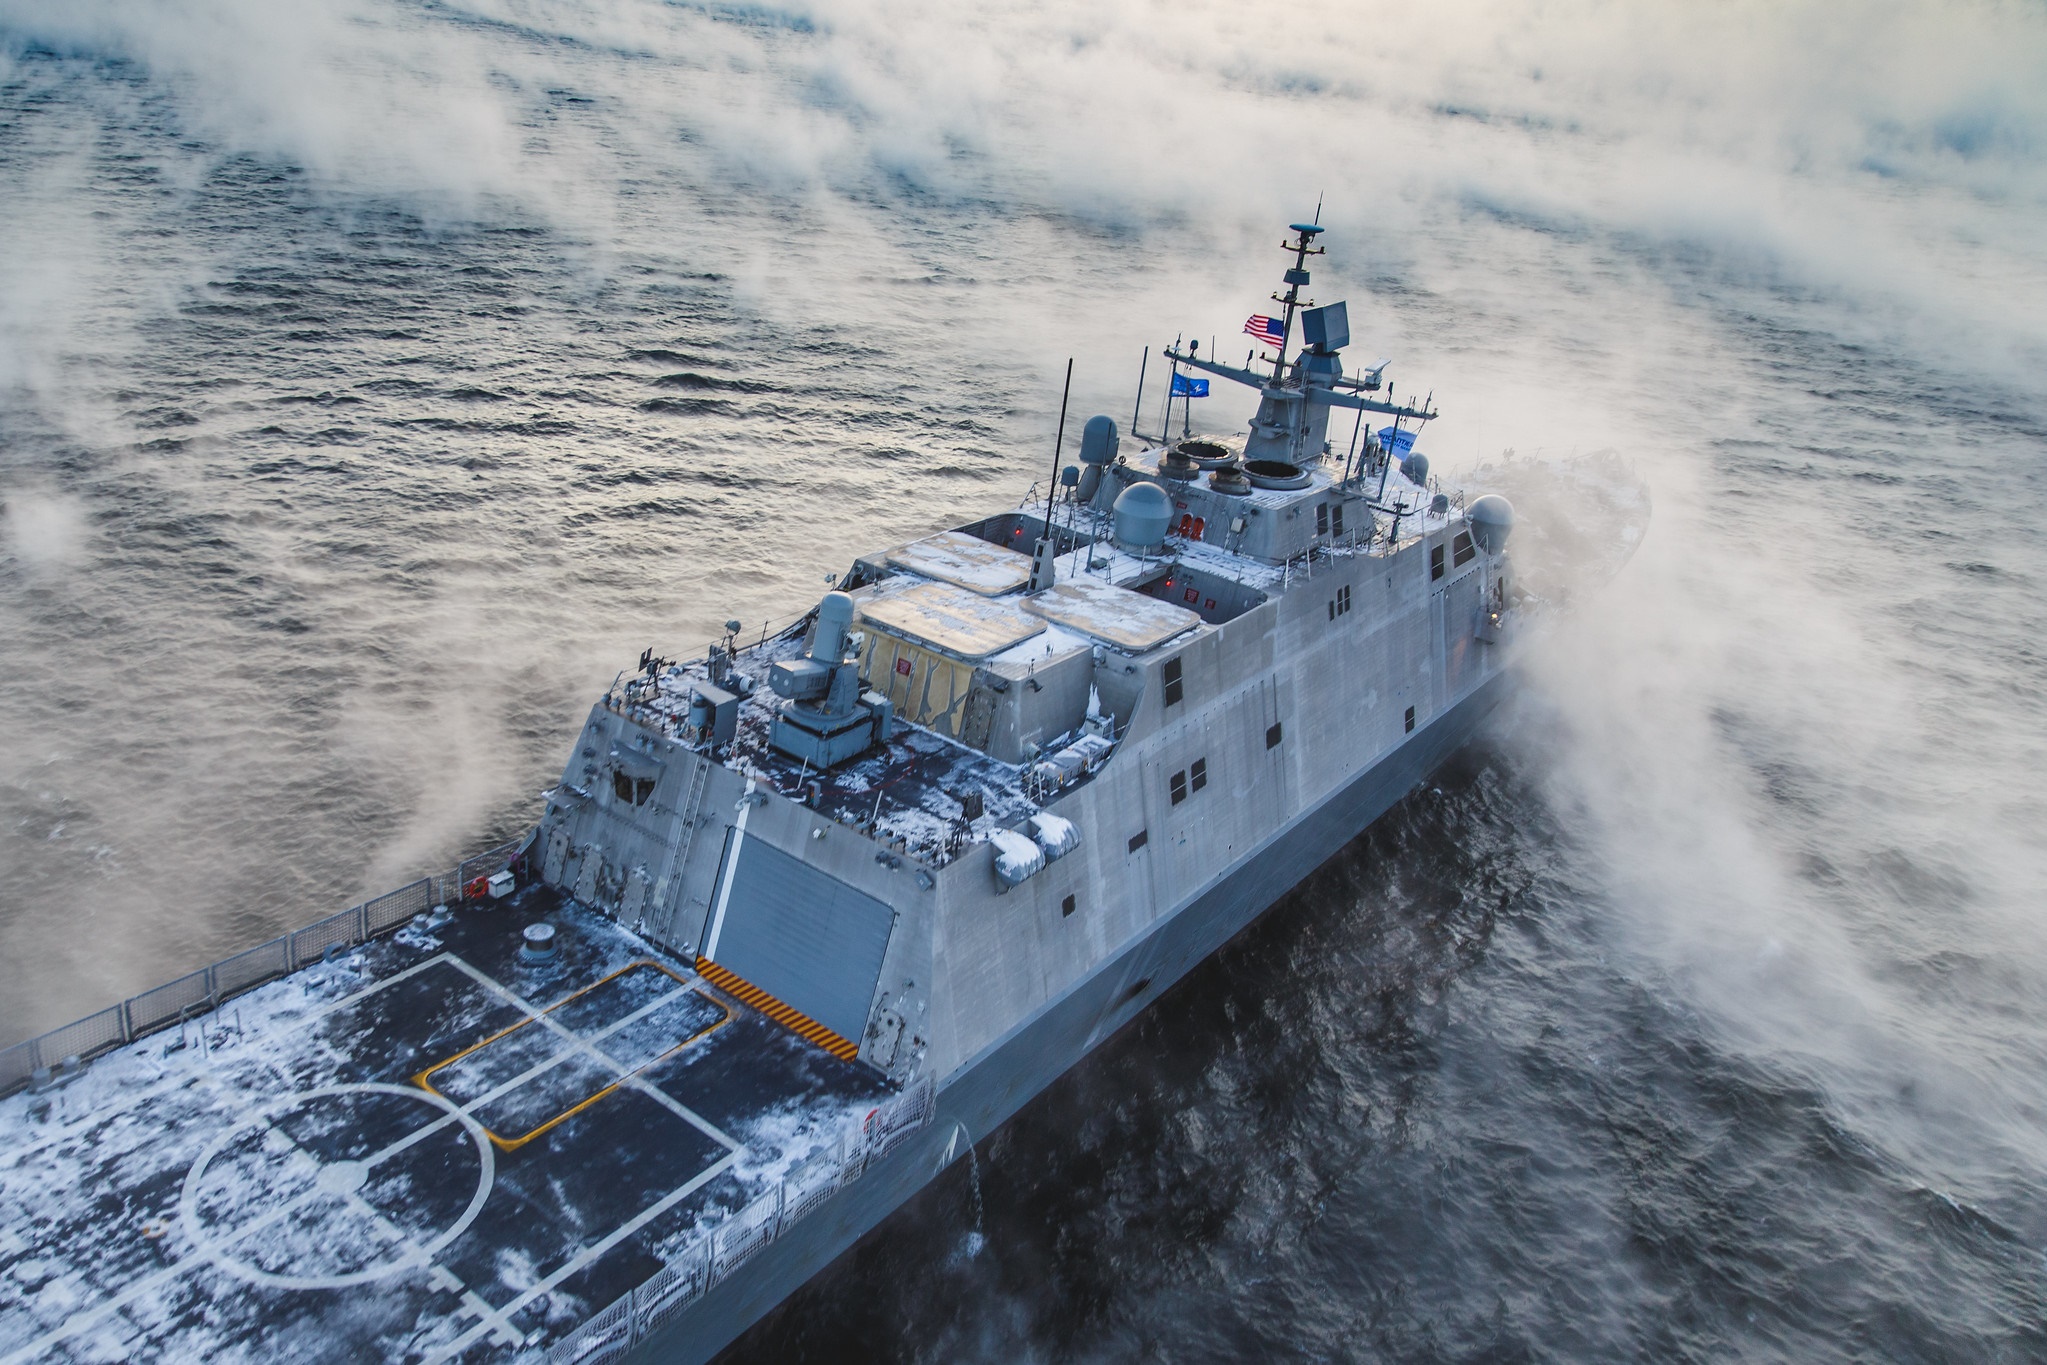 The future USS St. Louis Littoral Combat Ship (LCS) 19 completed Acceptance Trials in Lake Michigan